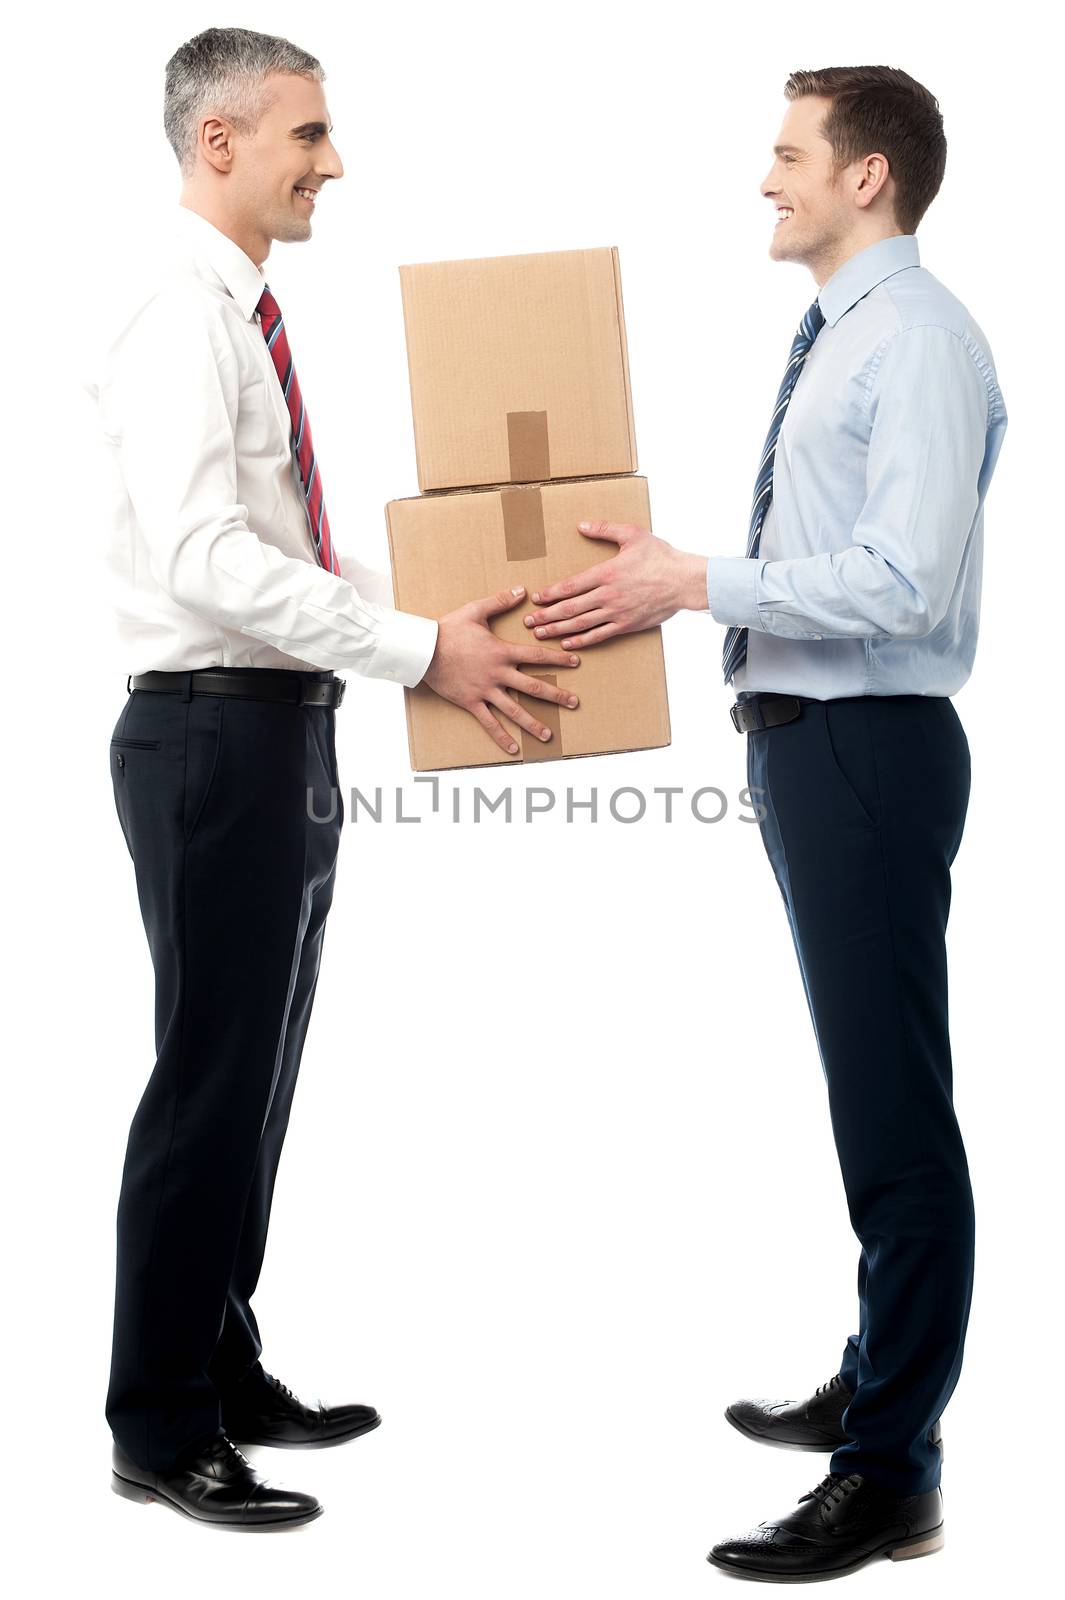 Smiling young men receive cartons boxes by stockyimages